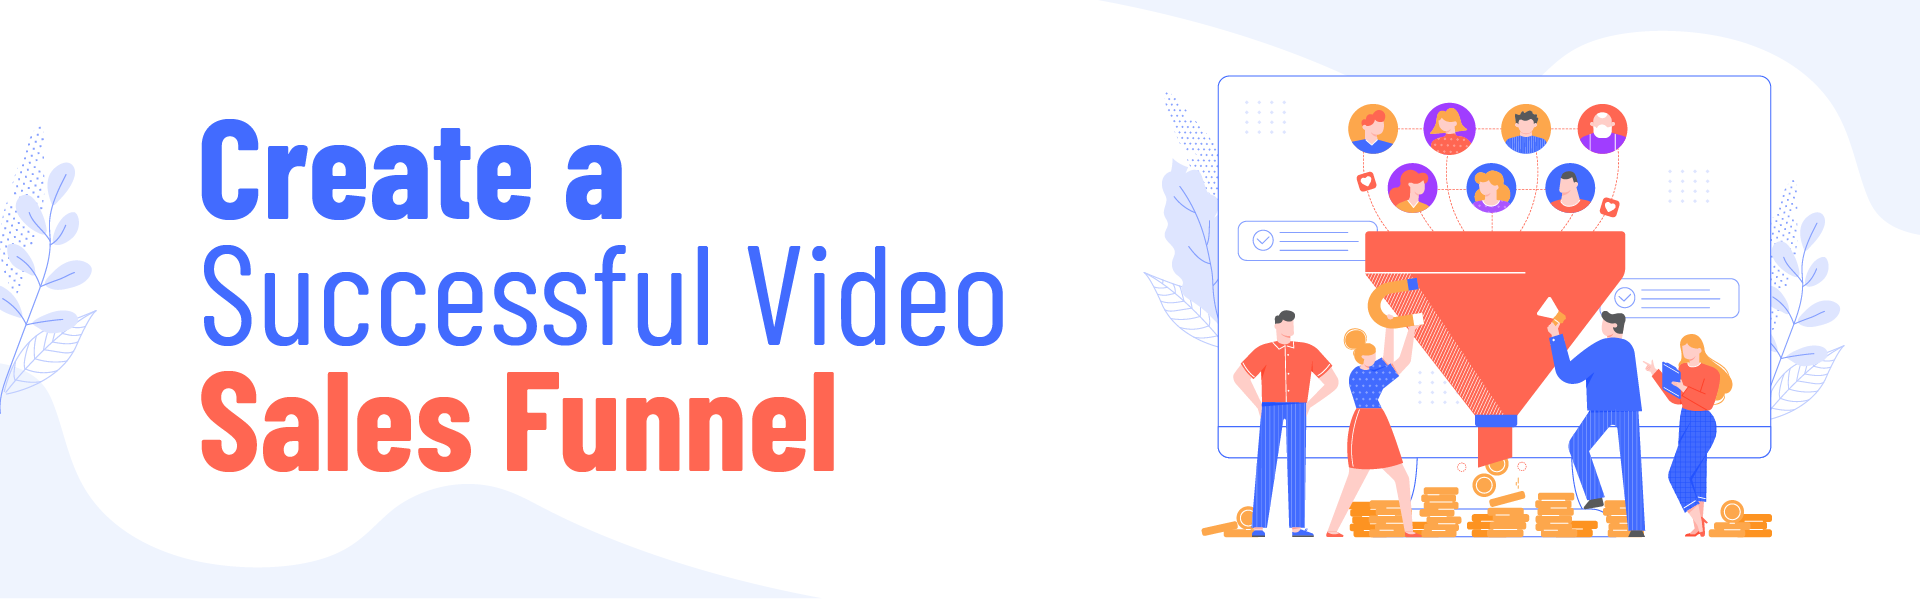 How To Create A Successful Video Sales Funnel